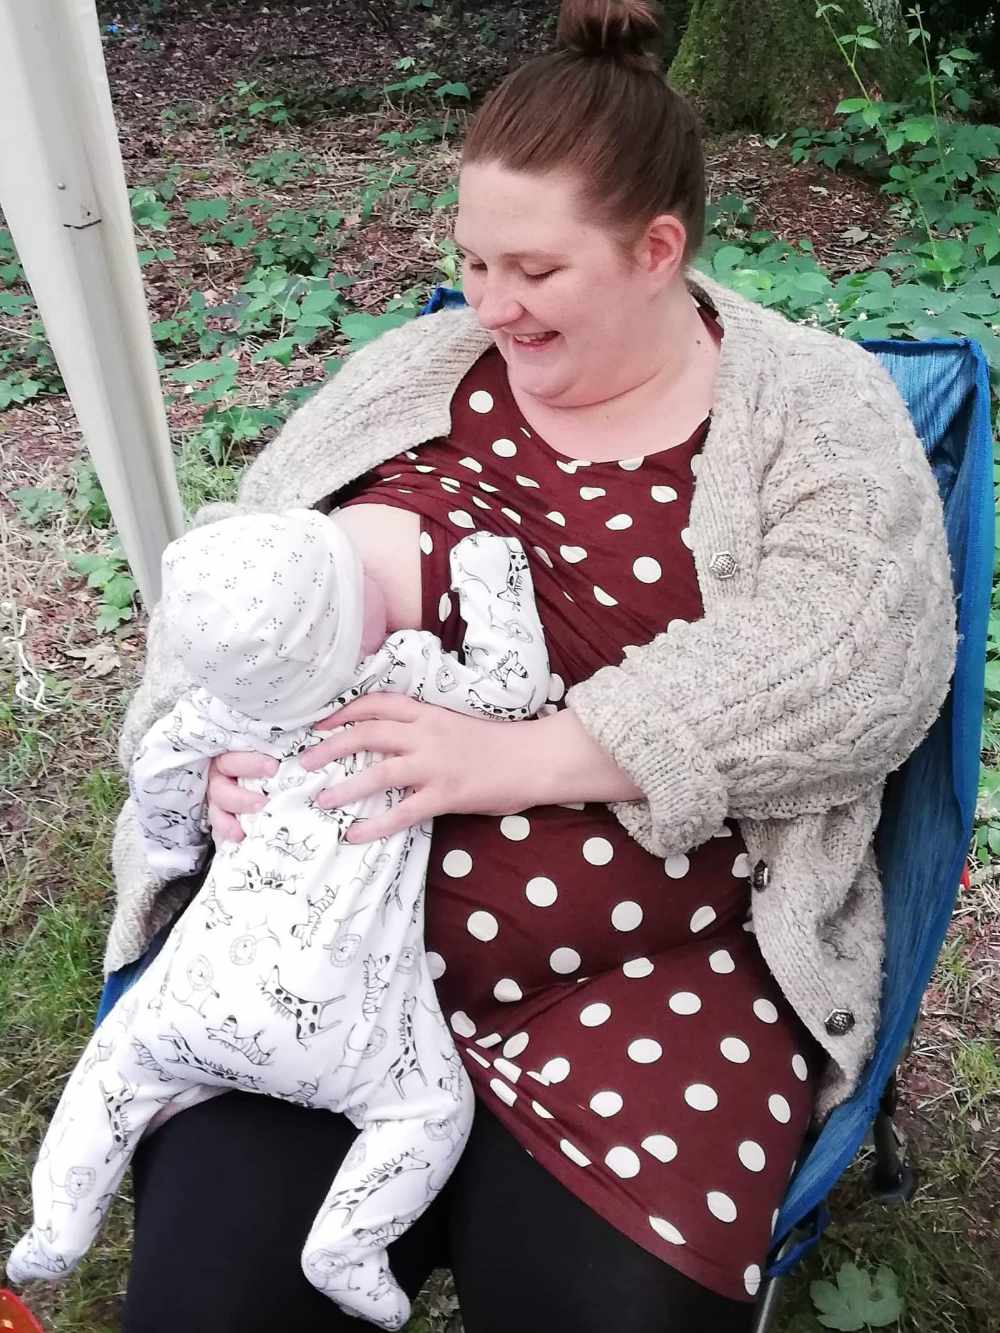 Breastfeeding Question: Can I Breastfeed with Larger Nipples?